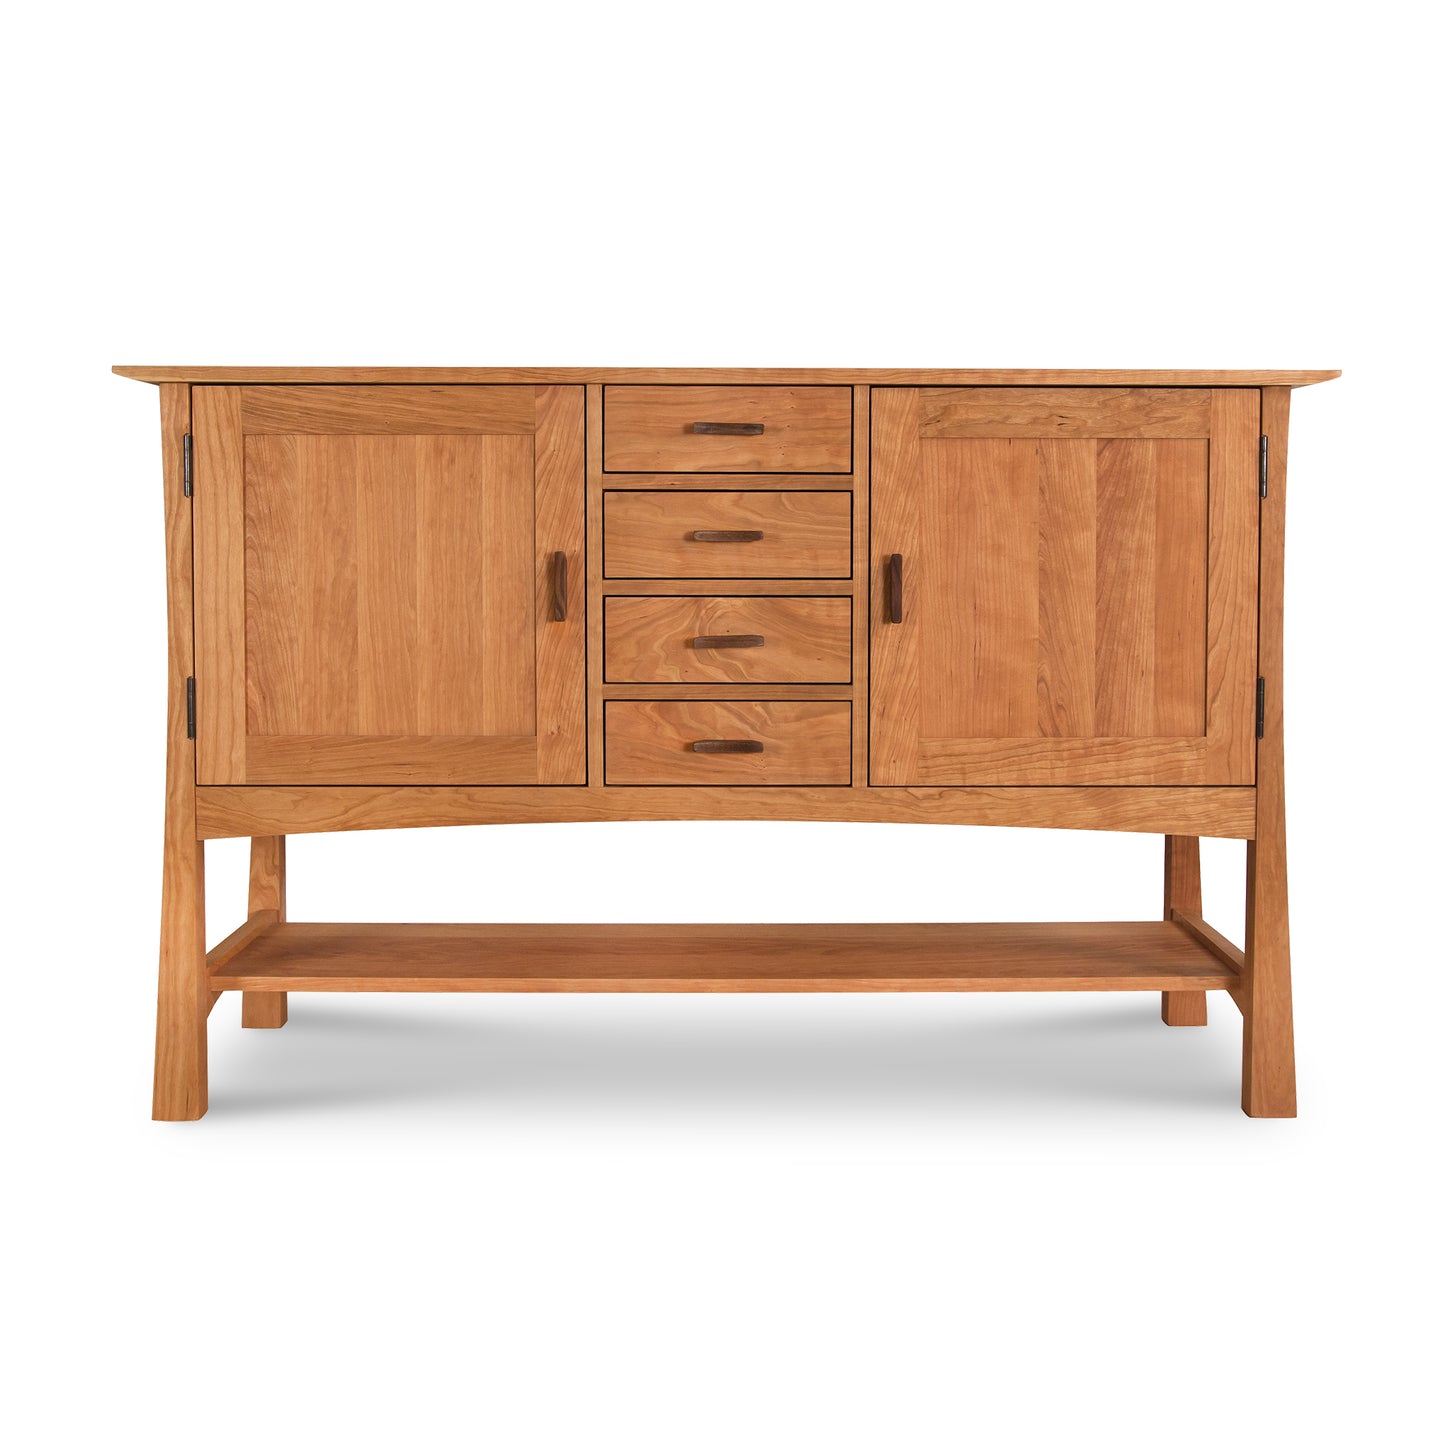 A meticulously crafted Vermont Furniture Designs Contemporary Craftsman Huntboard with drawers and doors, perfect for dining storage or as a huntboard.